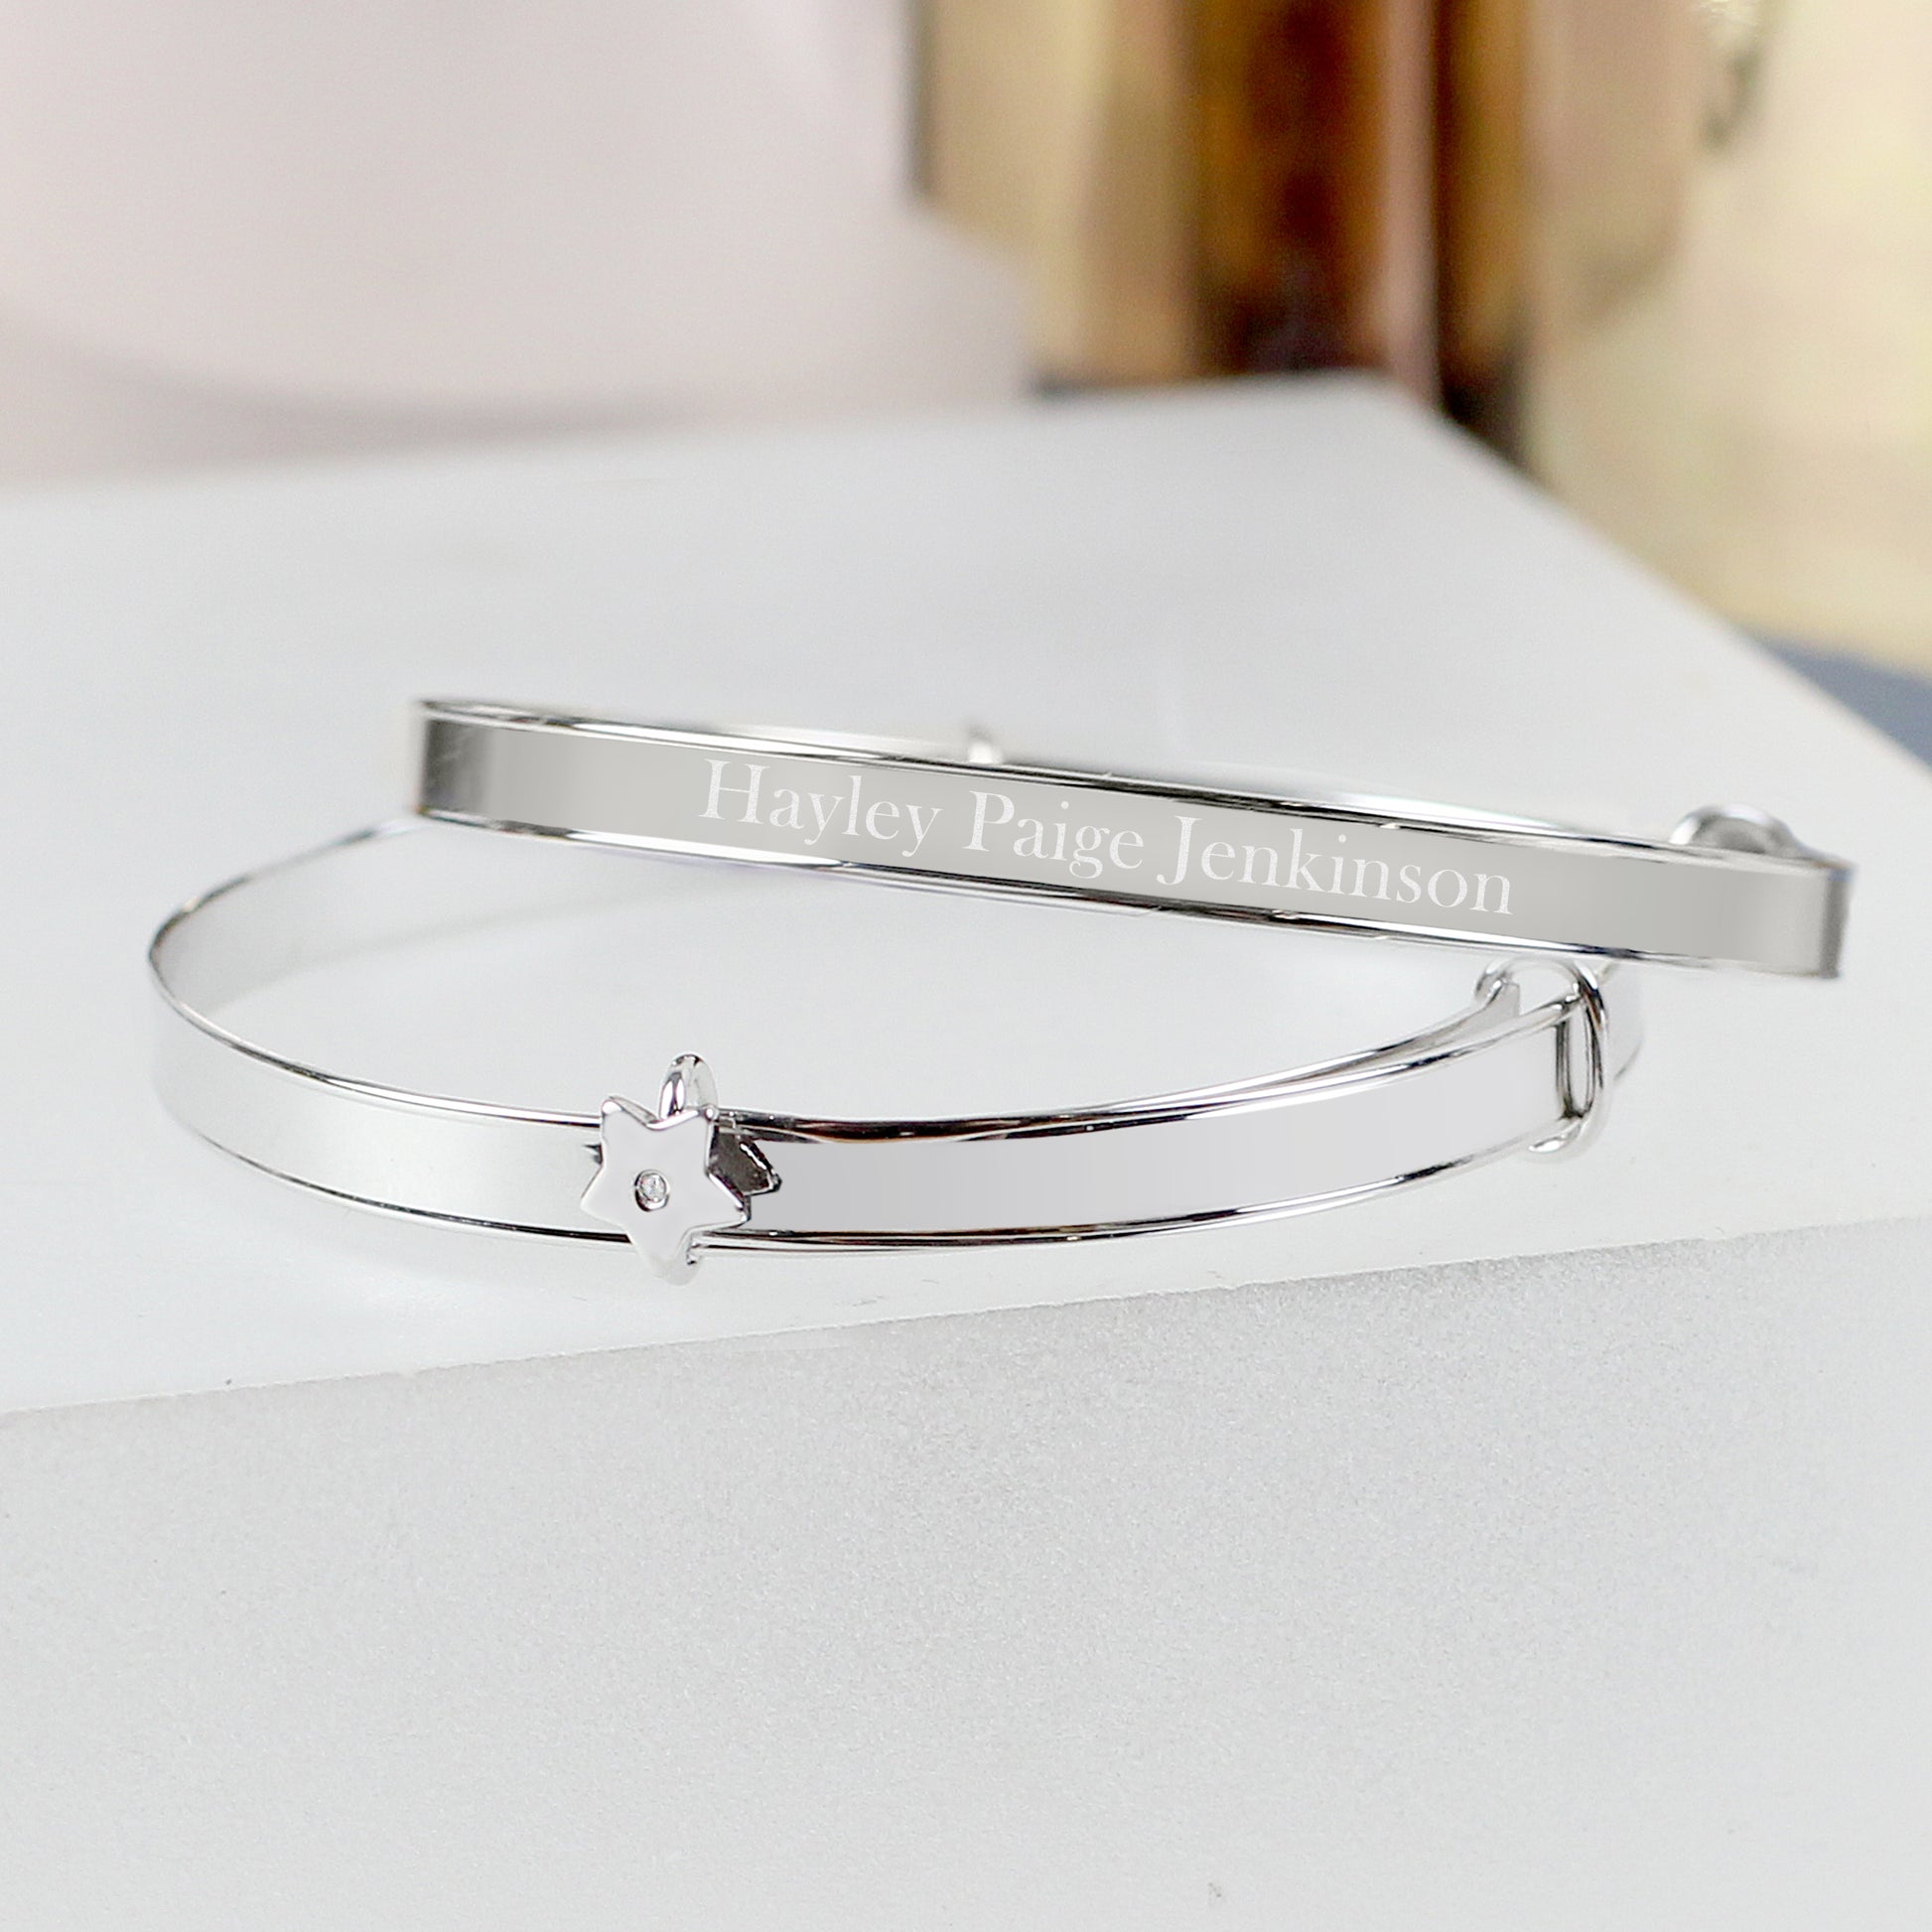 Child's expanding diamante star bracelet, personalised sterling silver - Lilybet loves